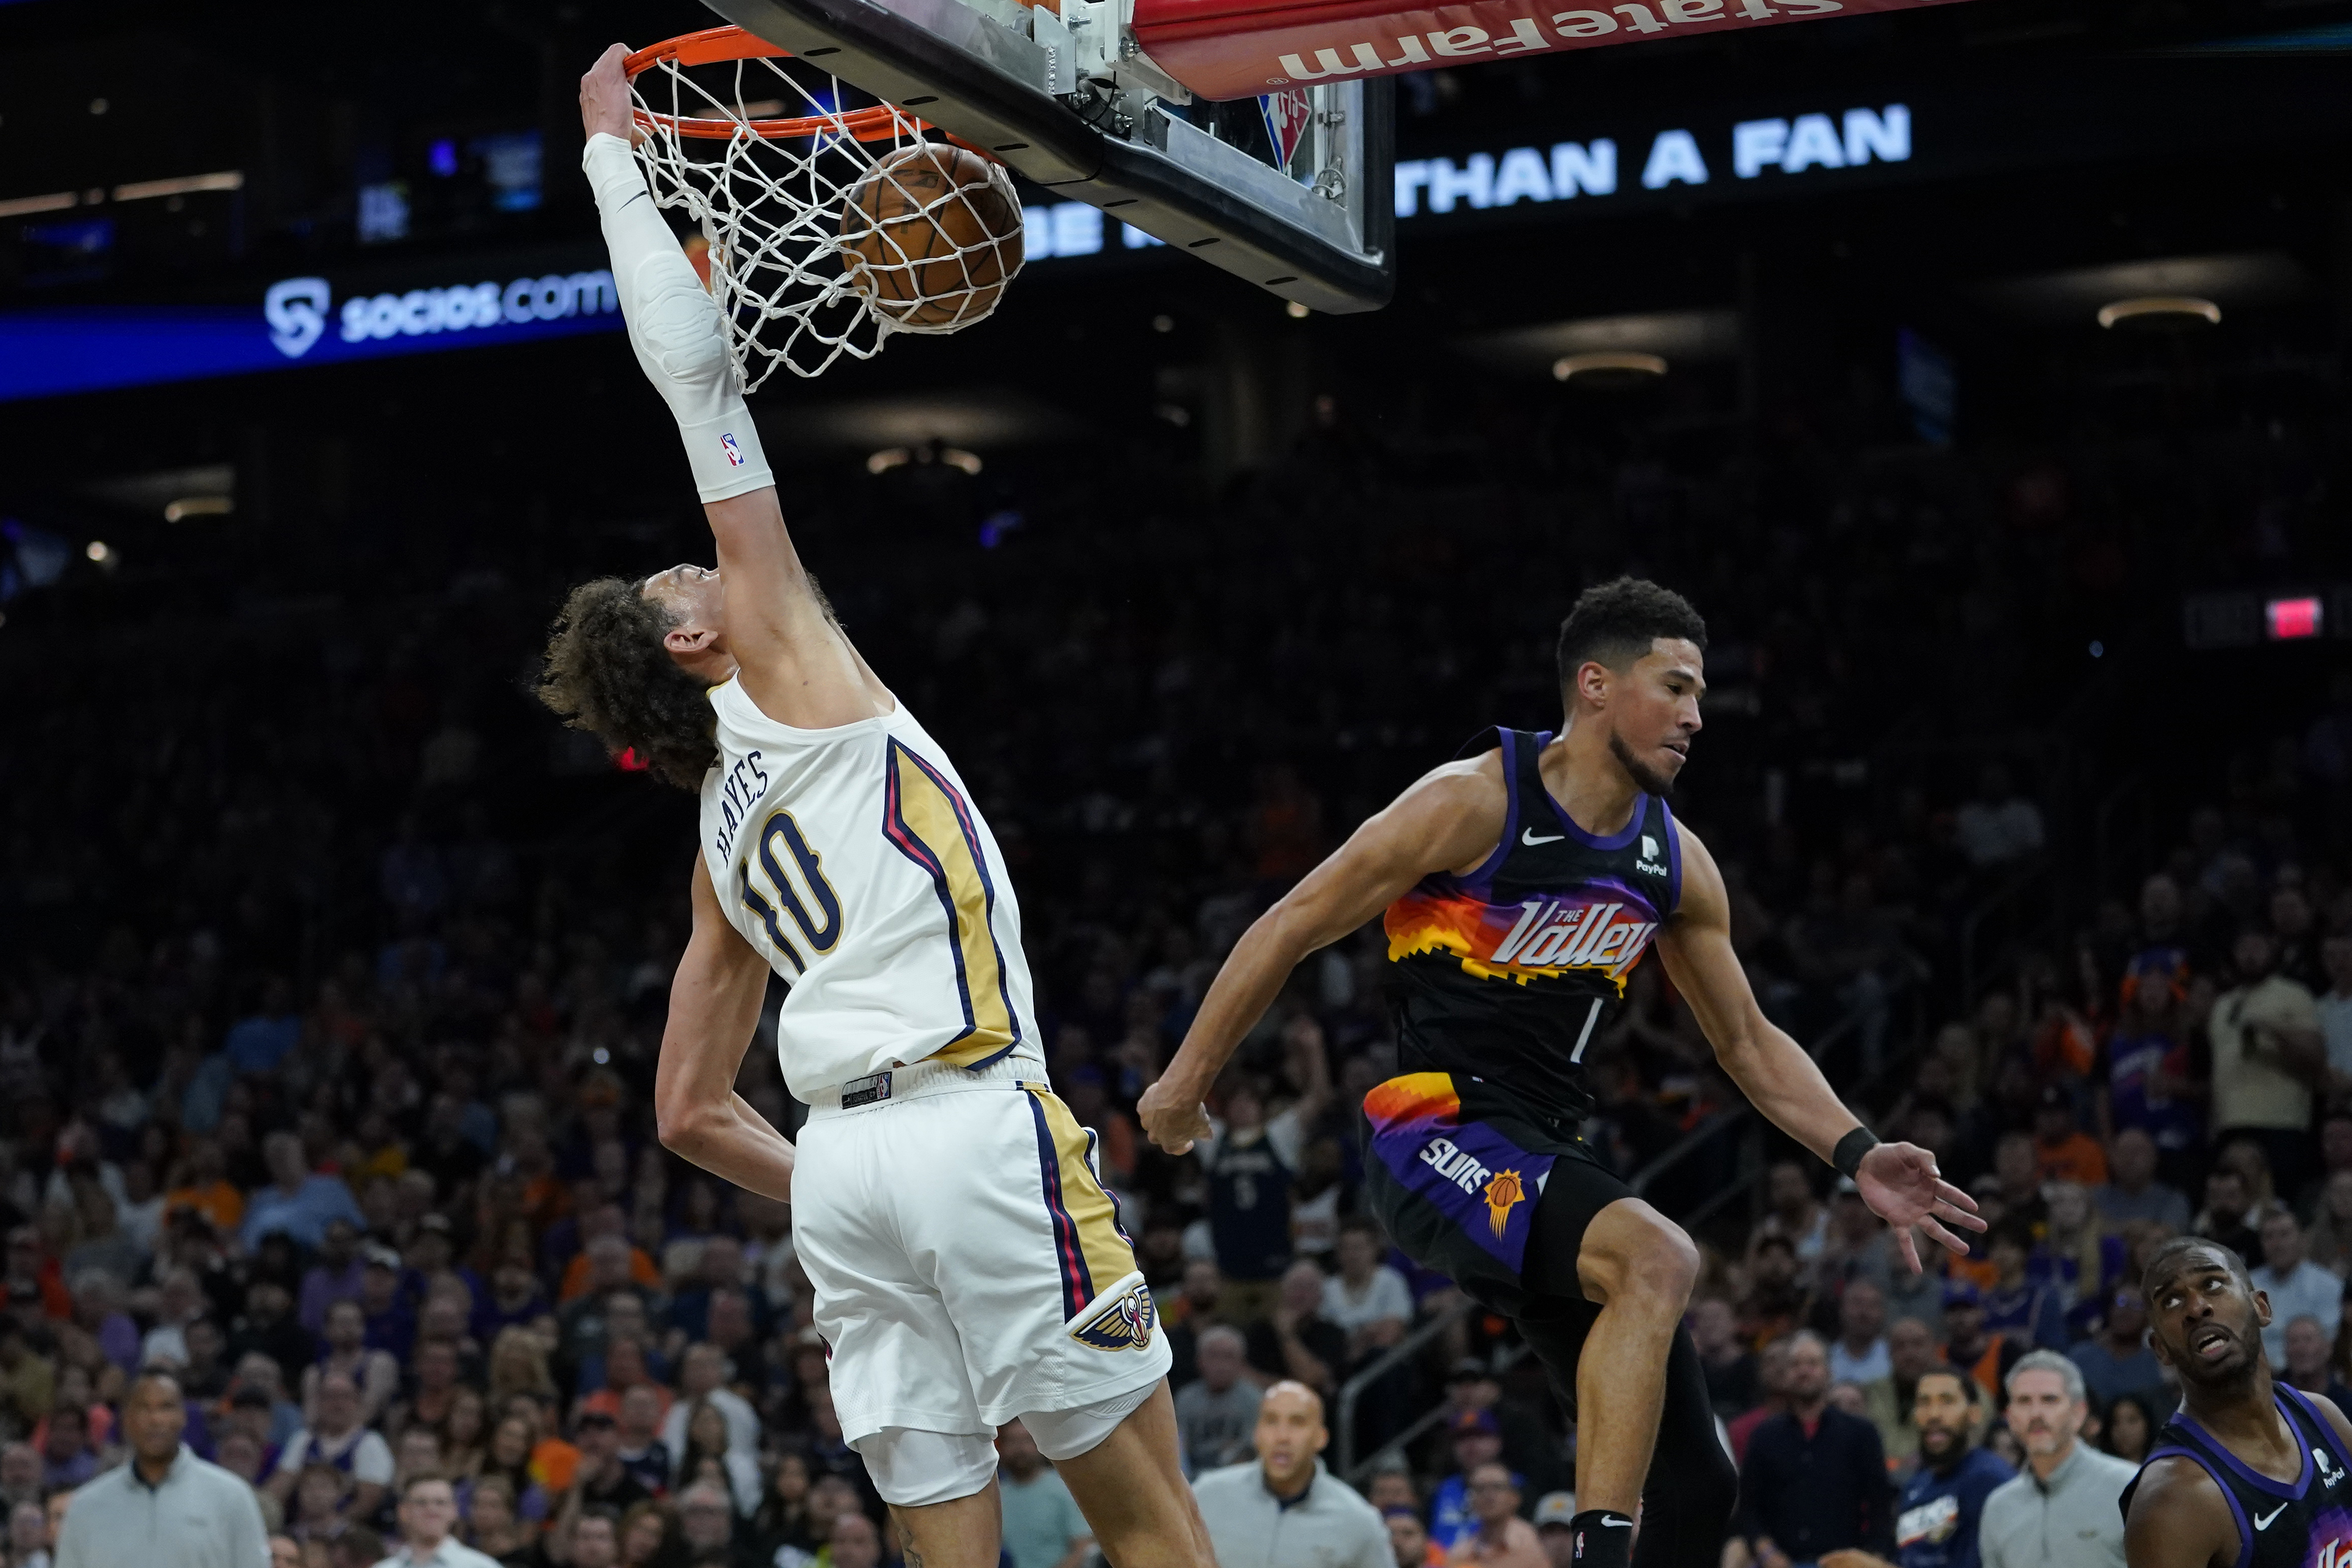 Devin Booker gets back into rhythm in the Suns' smashing win vs